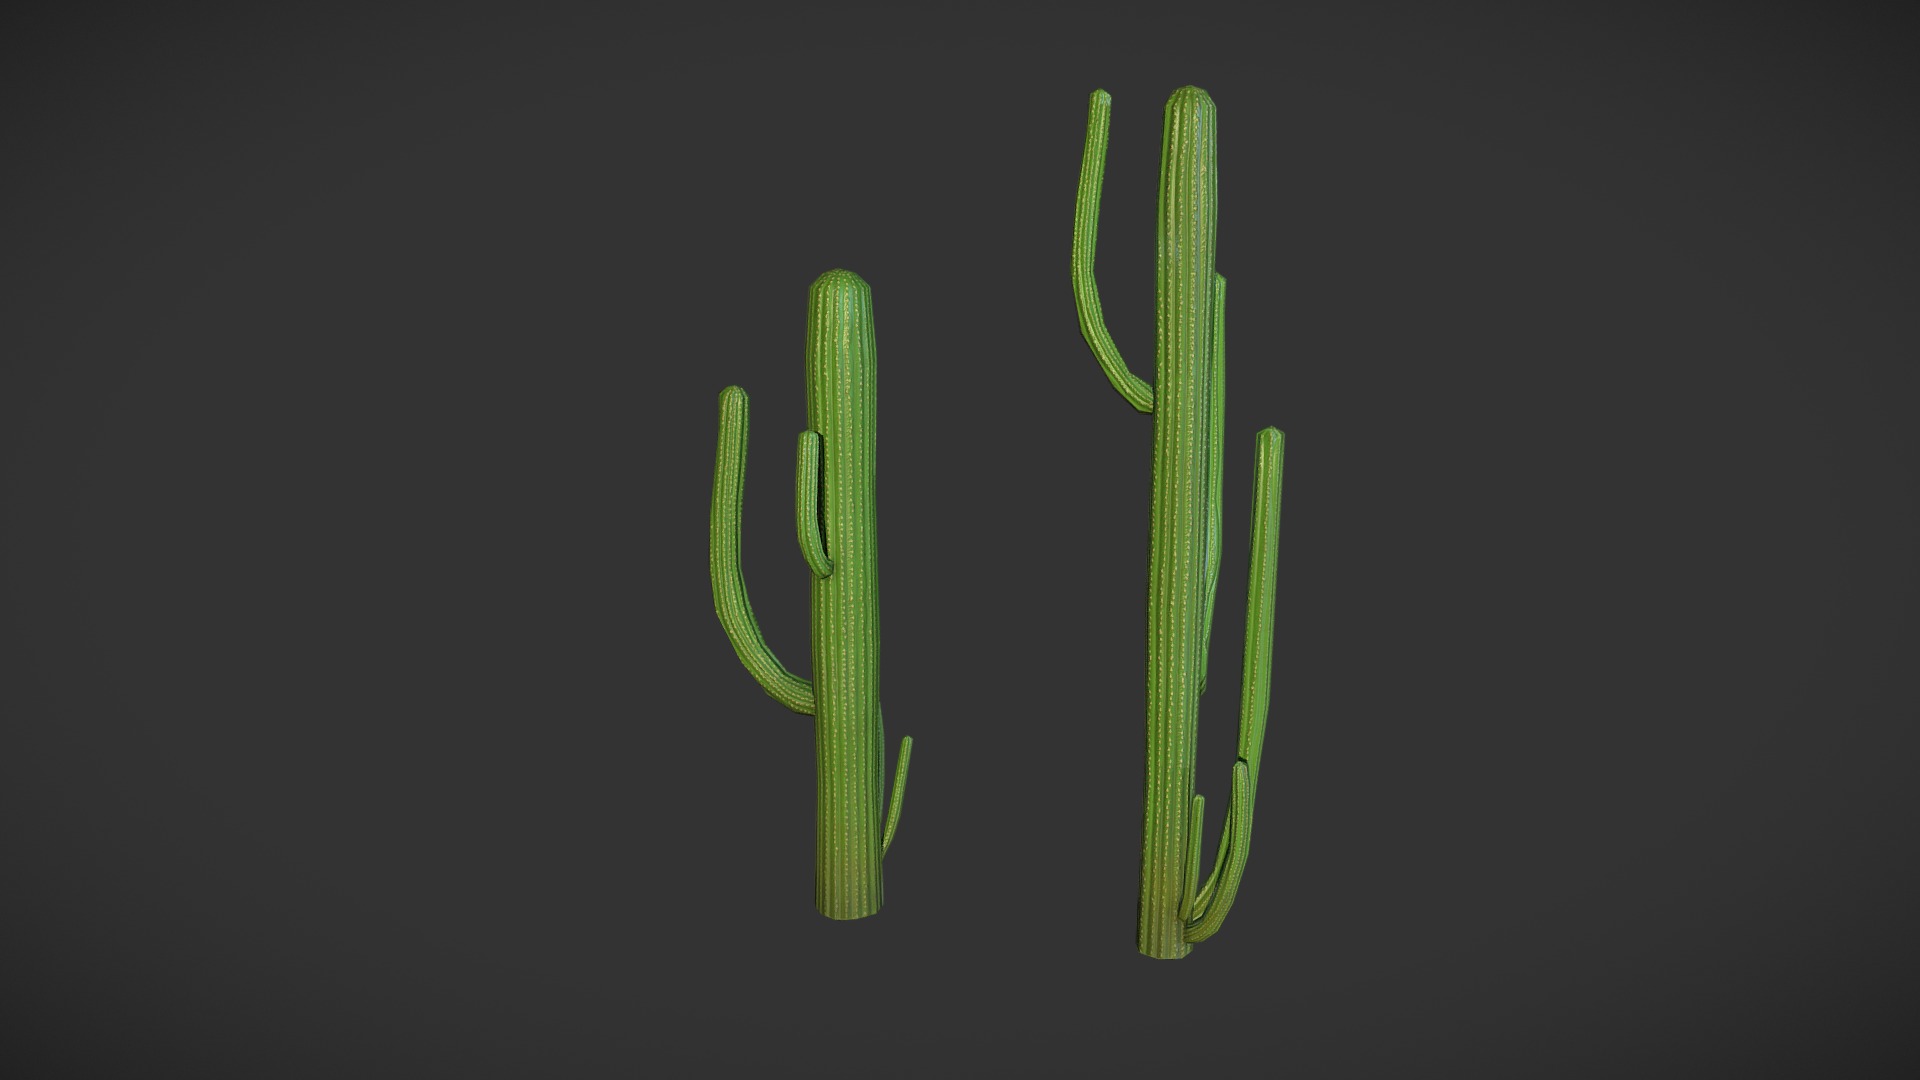 3D model PBR Cactuses - This is a 3D model of the PBR Cactuses. The 3D model is about text.